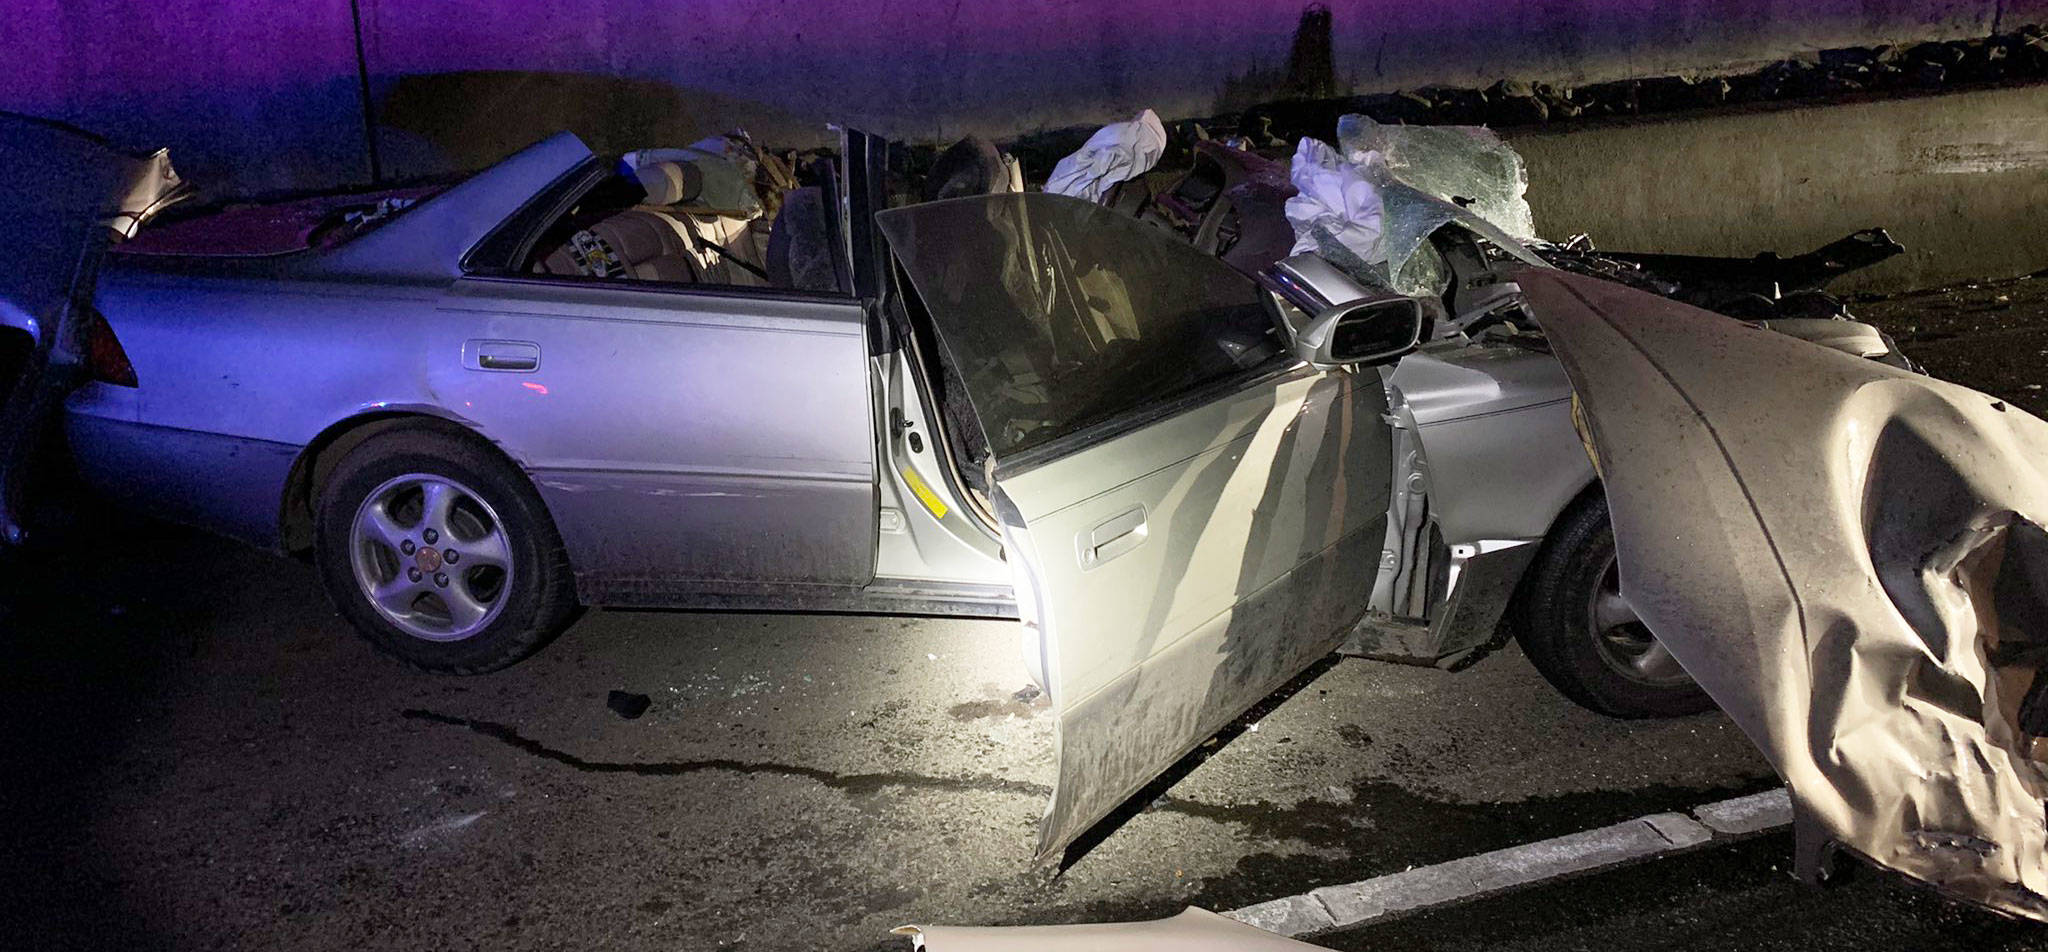 A Kent man, 25, was critically injured in this Toyota Camry in a head-on collision March 11 along Highway 18 near Kent. COURTESY PHOTO, State Patrol